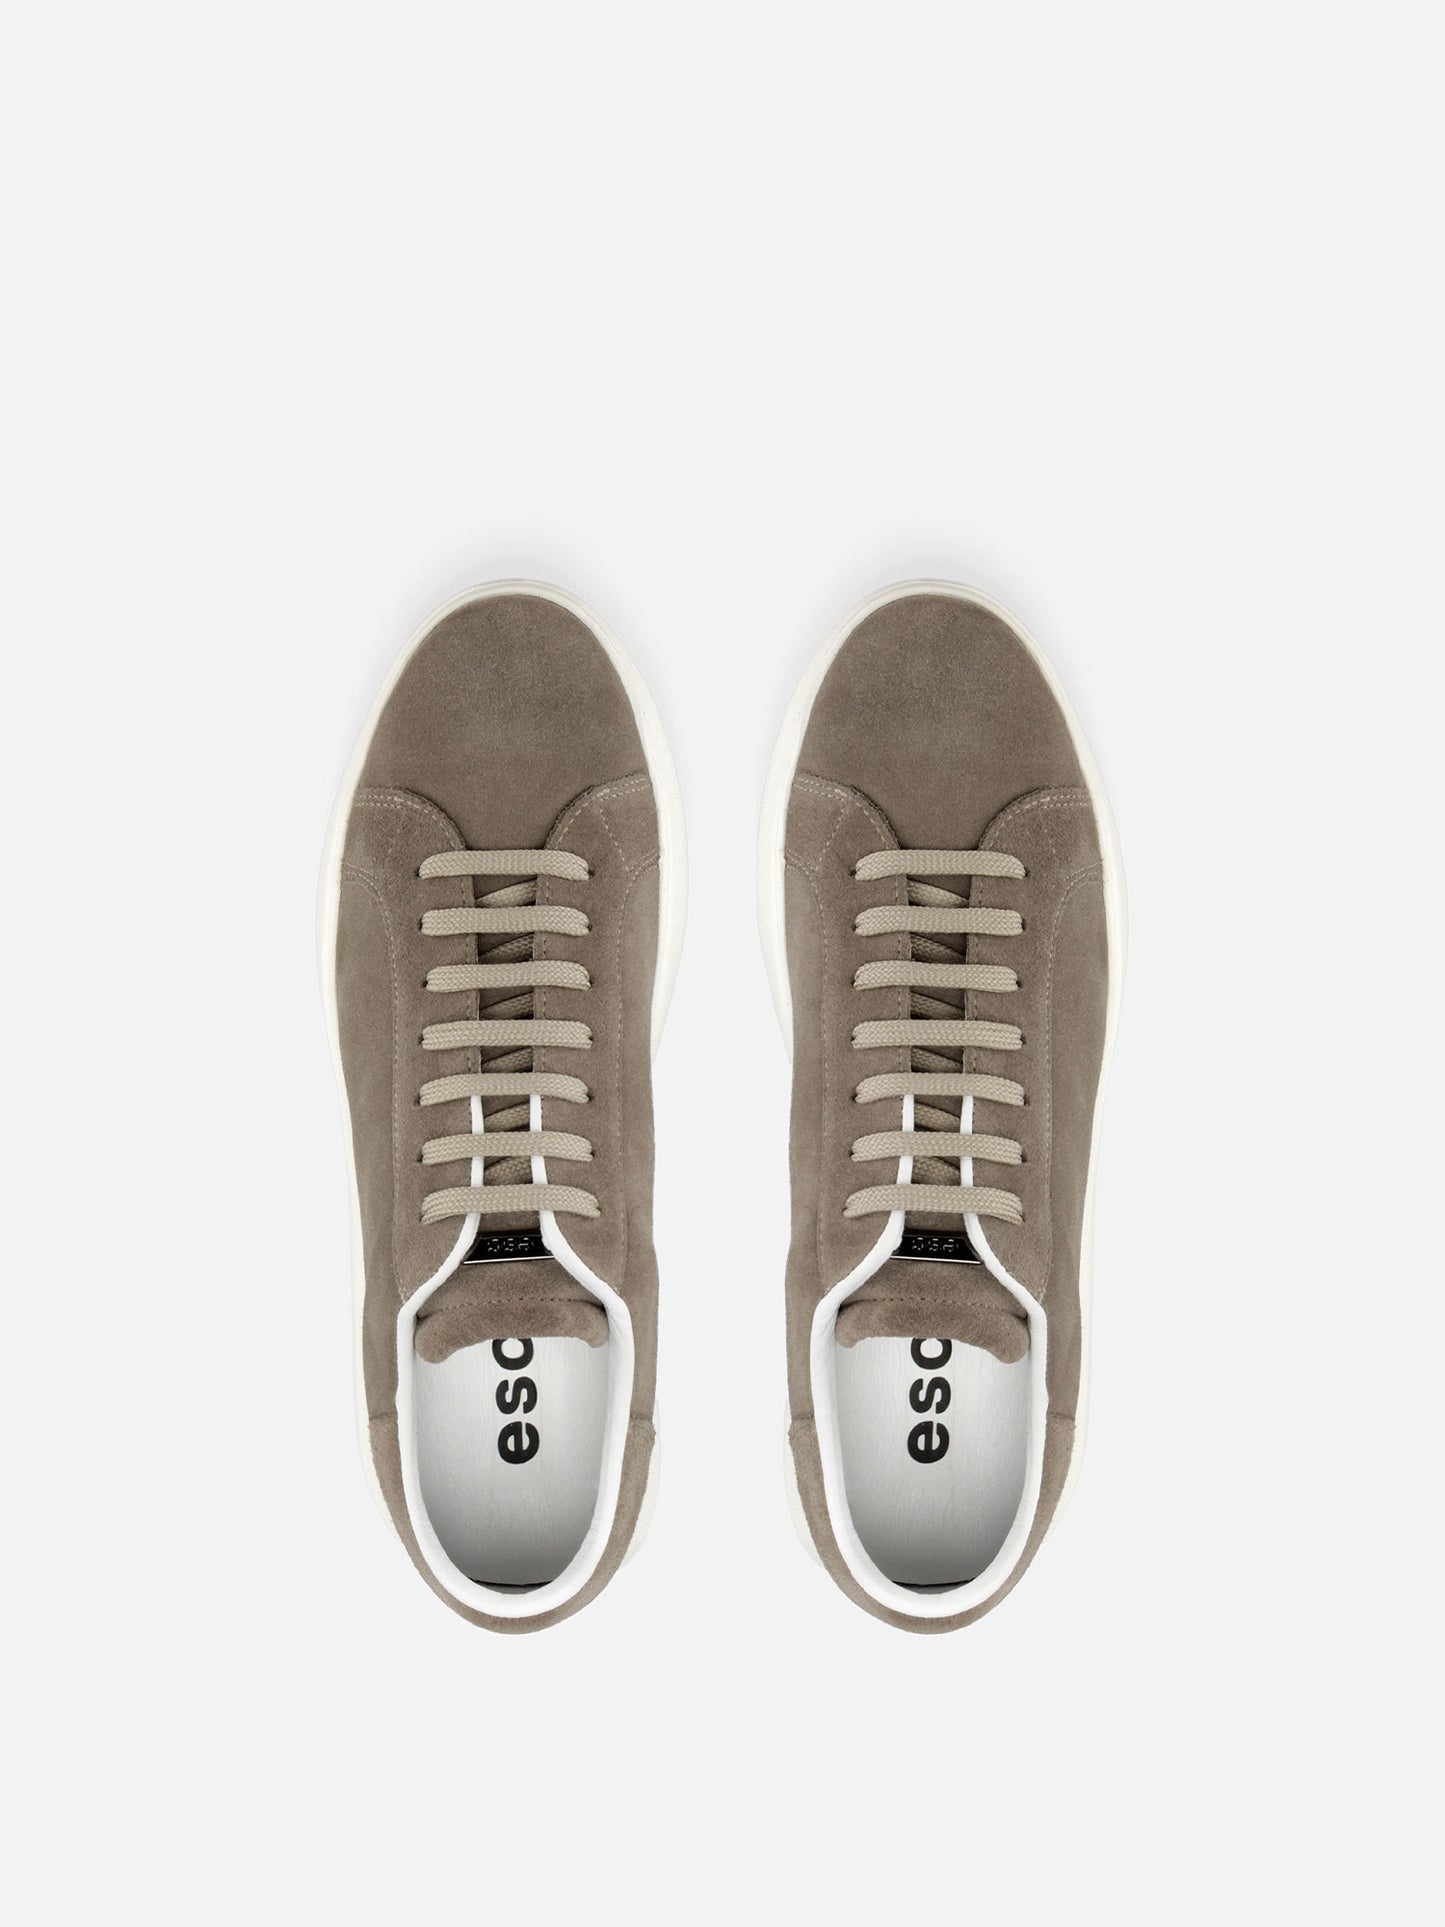 BOT Leather Sneakers - Beige